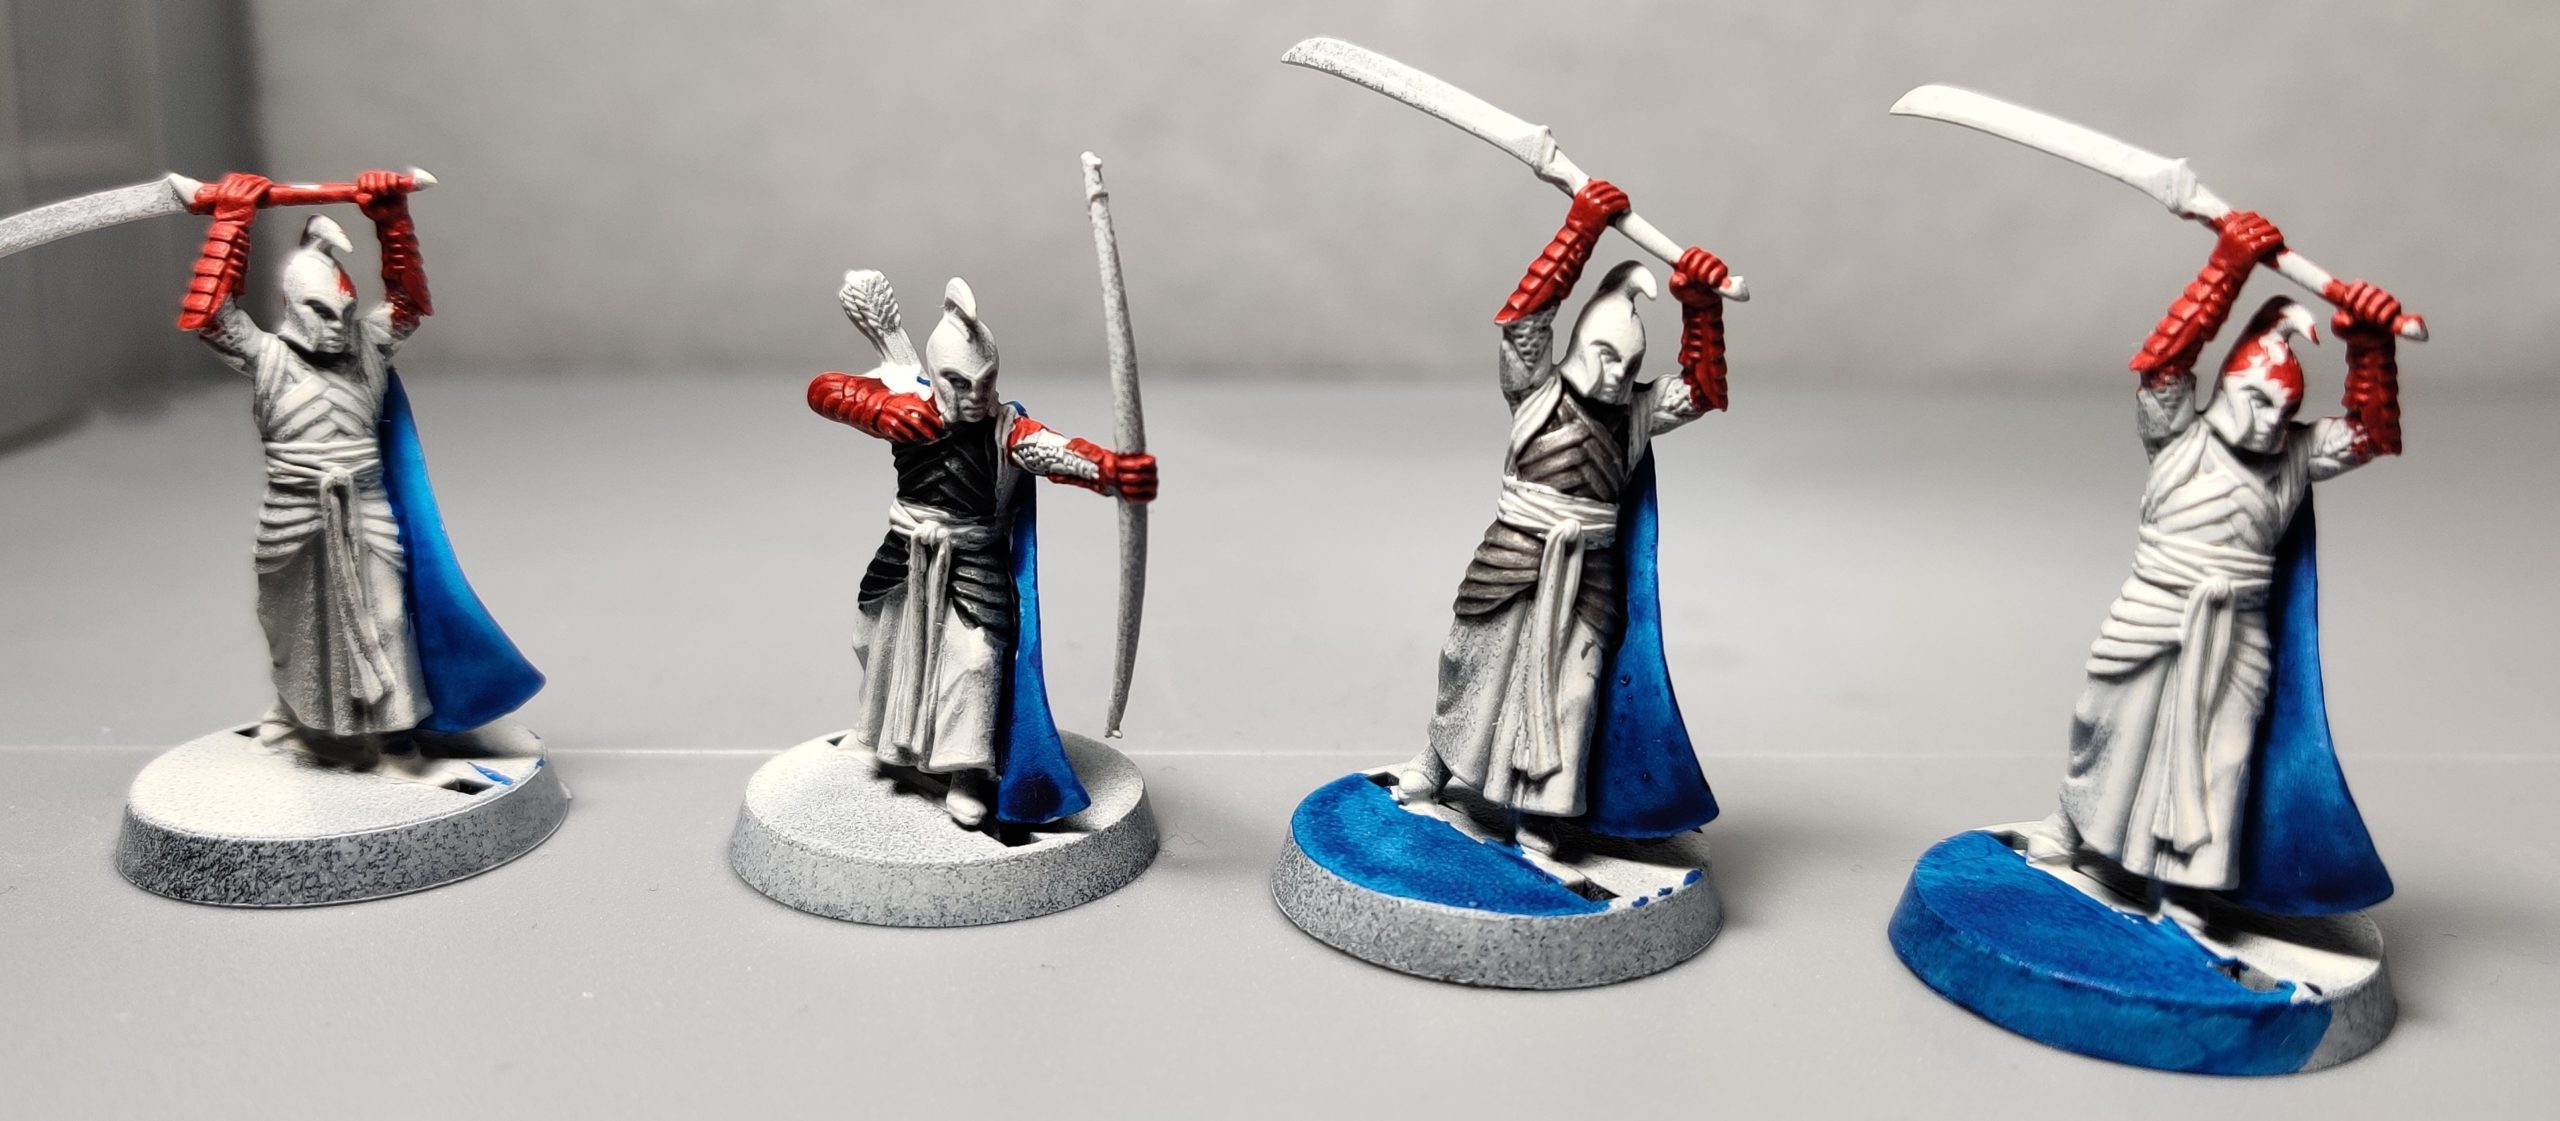 Red, white, and blue LOTR high elves from the front.